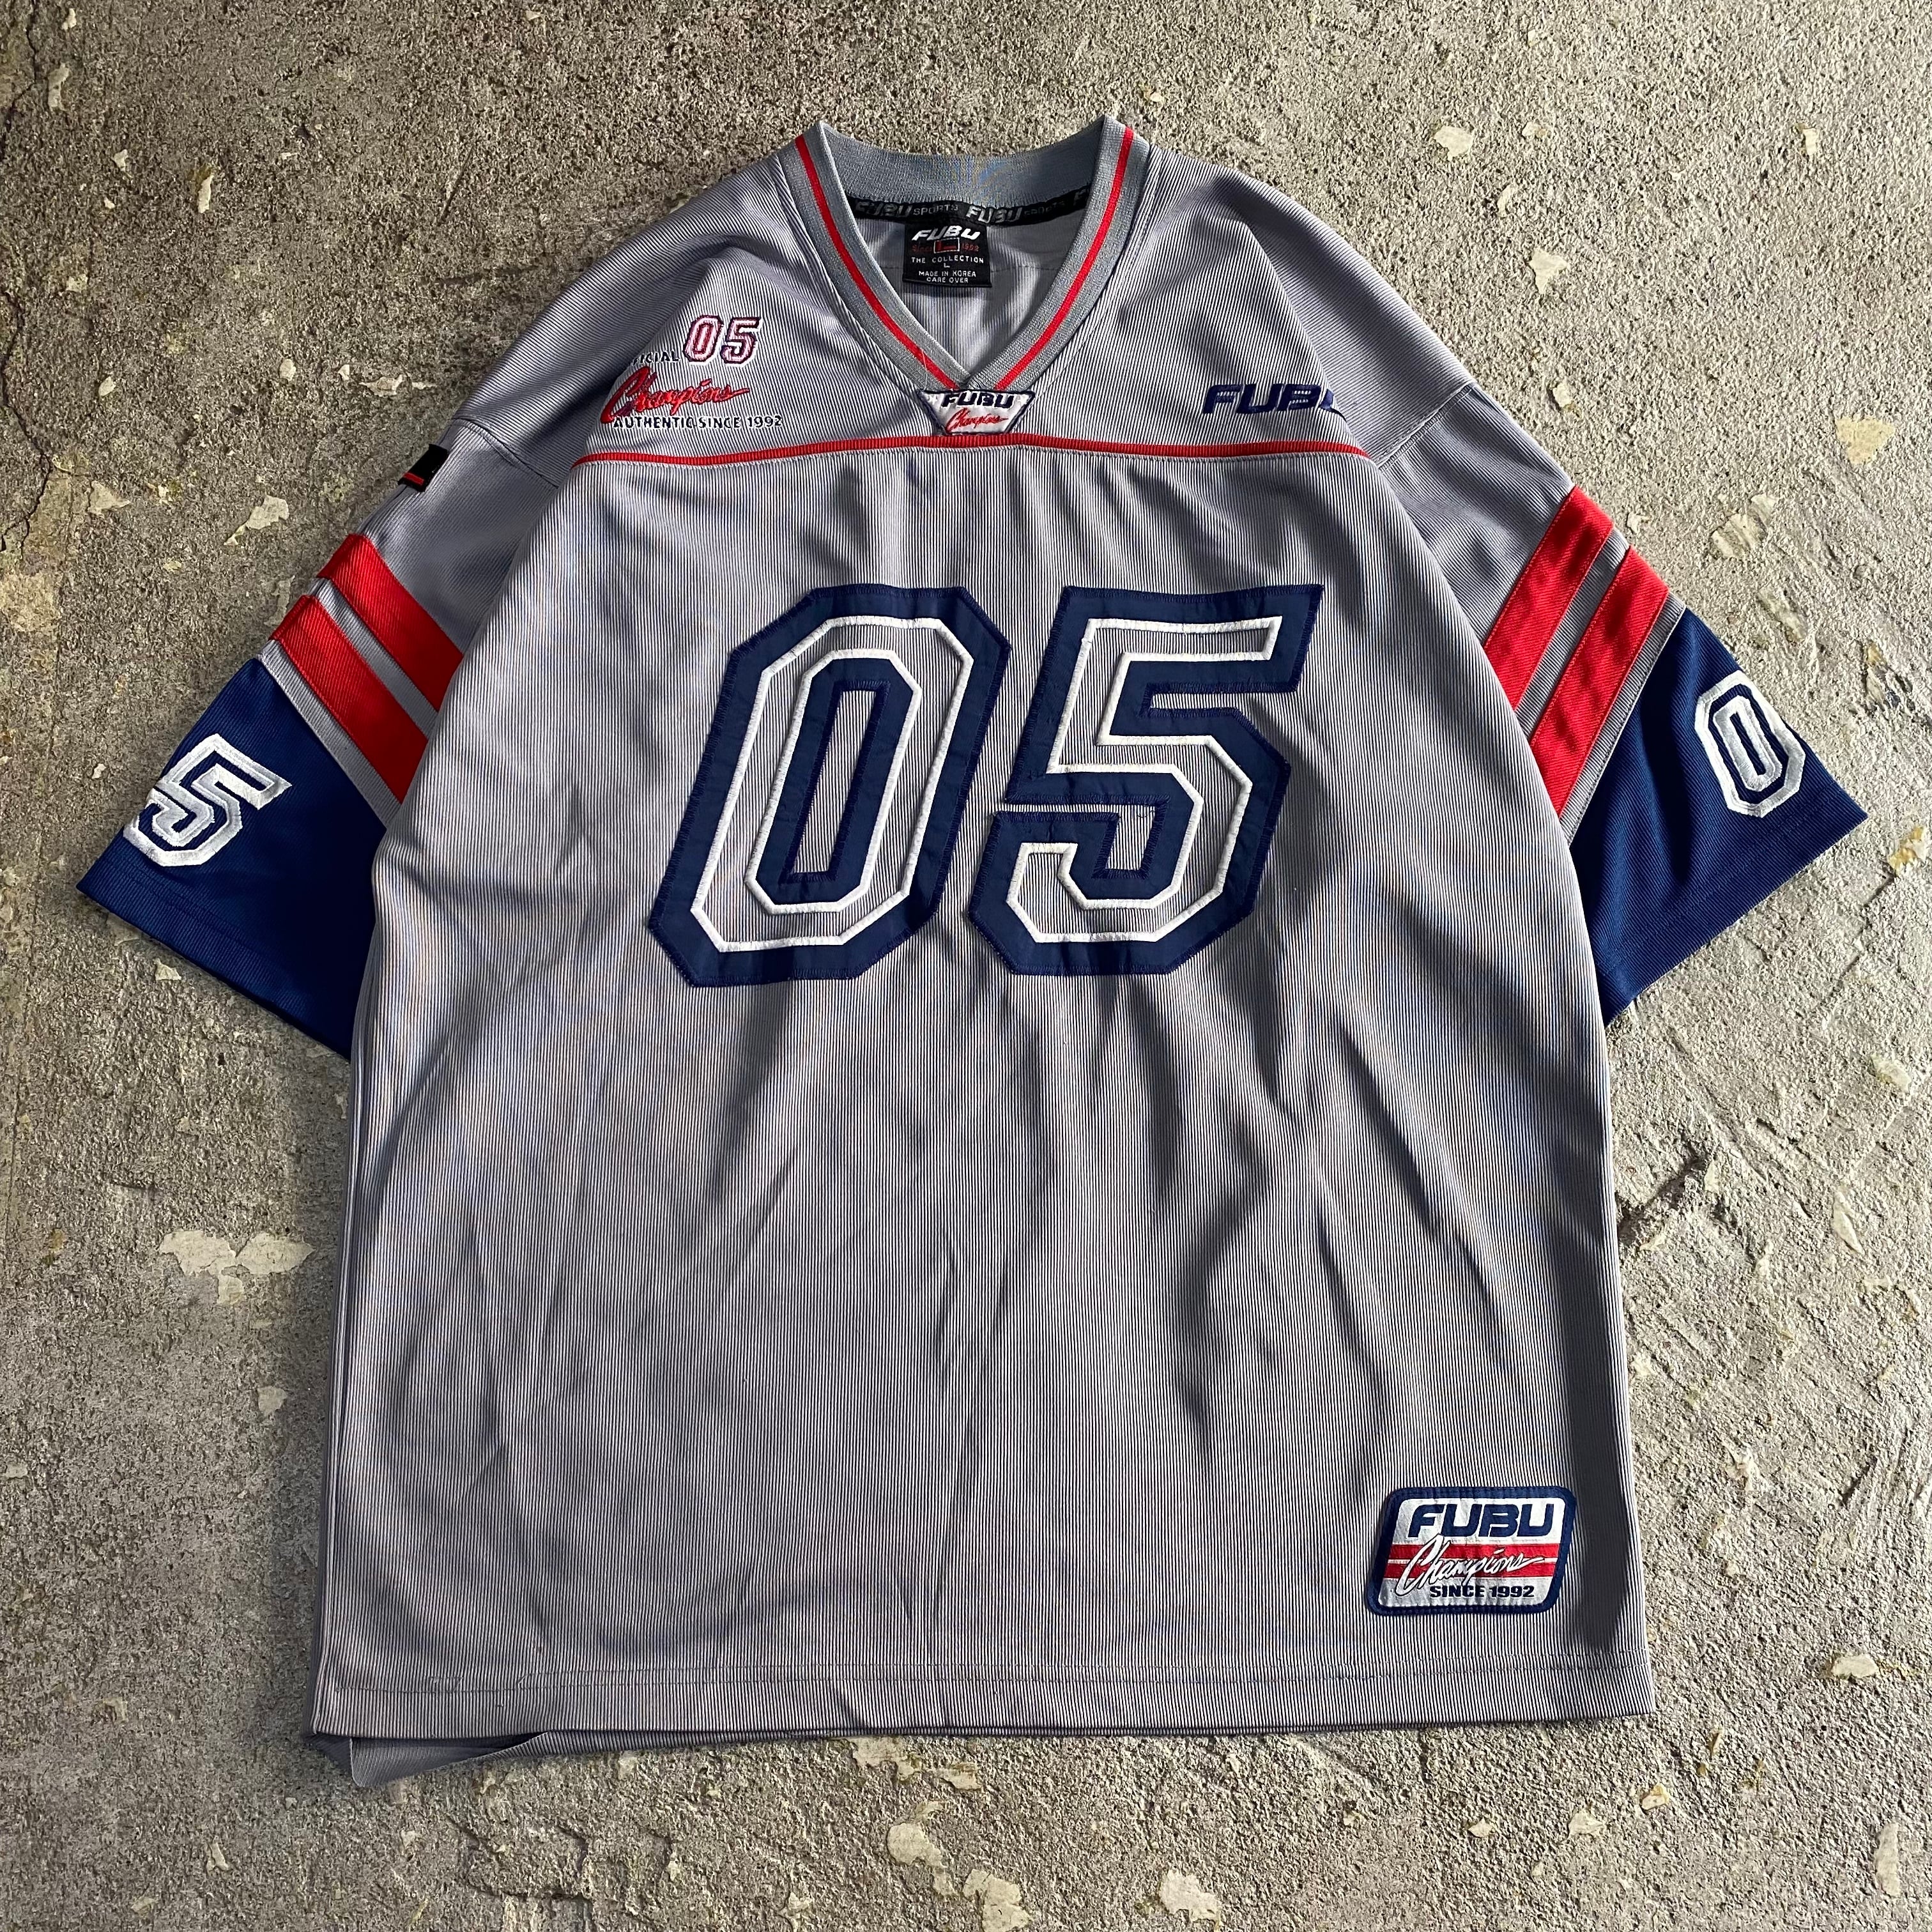 90s〜 FUBU game shirt | What'z up